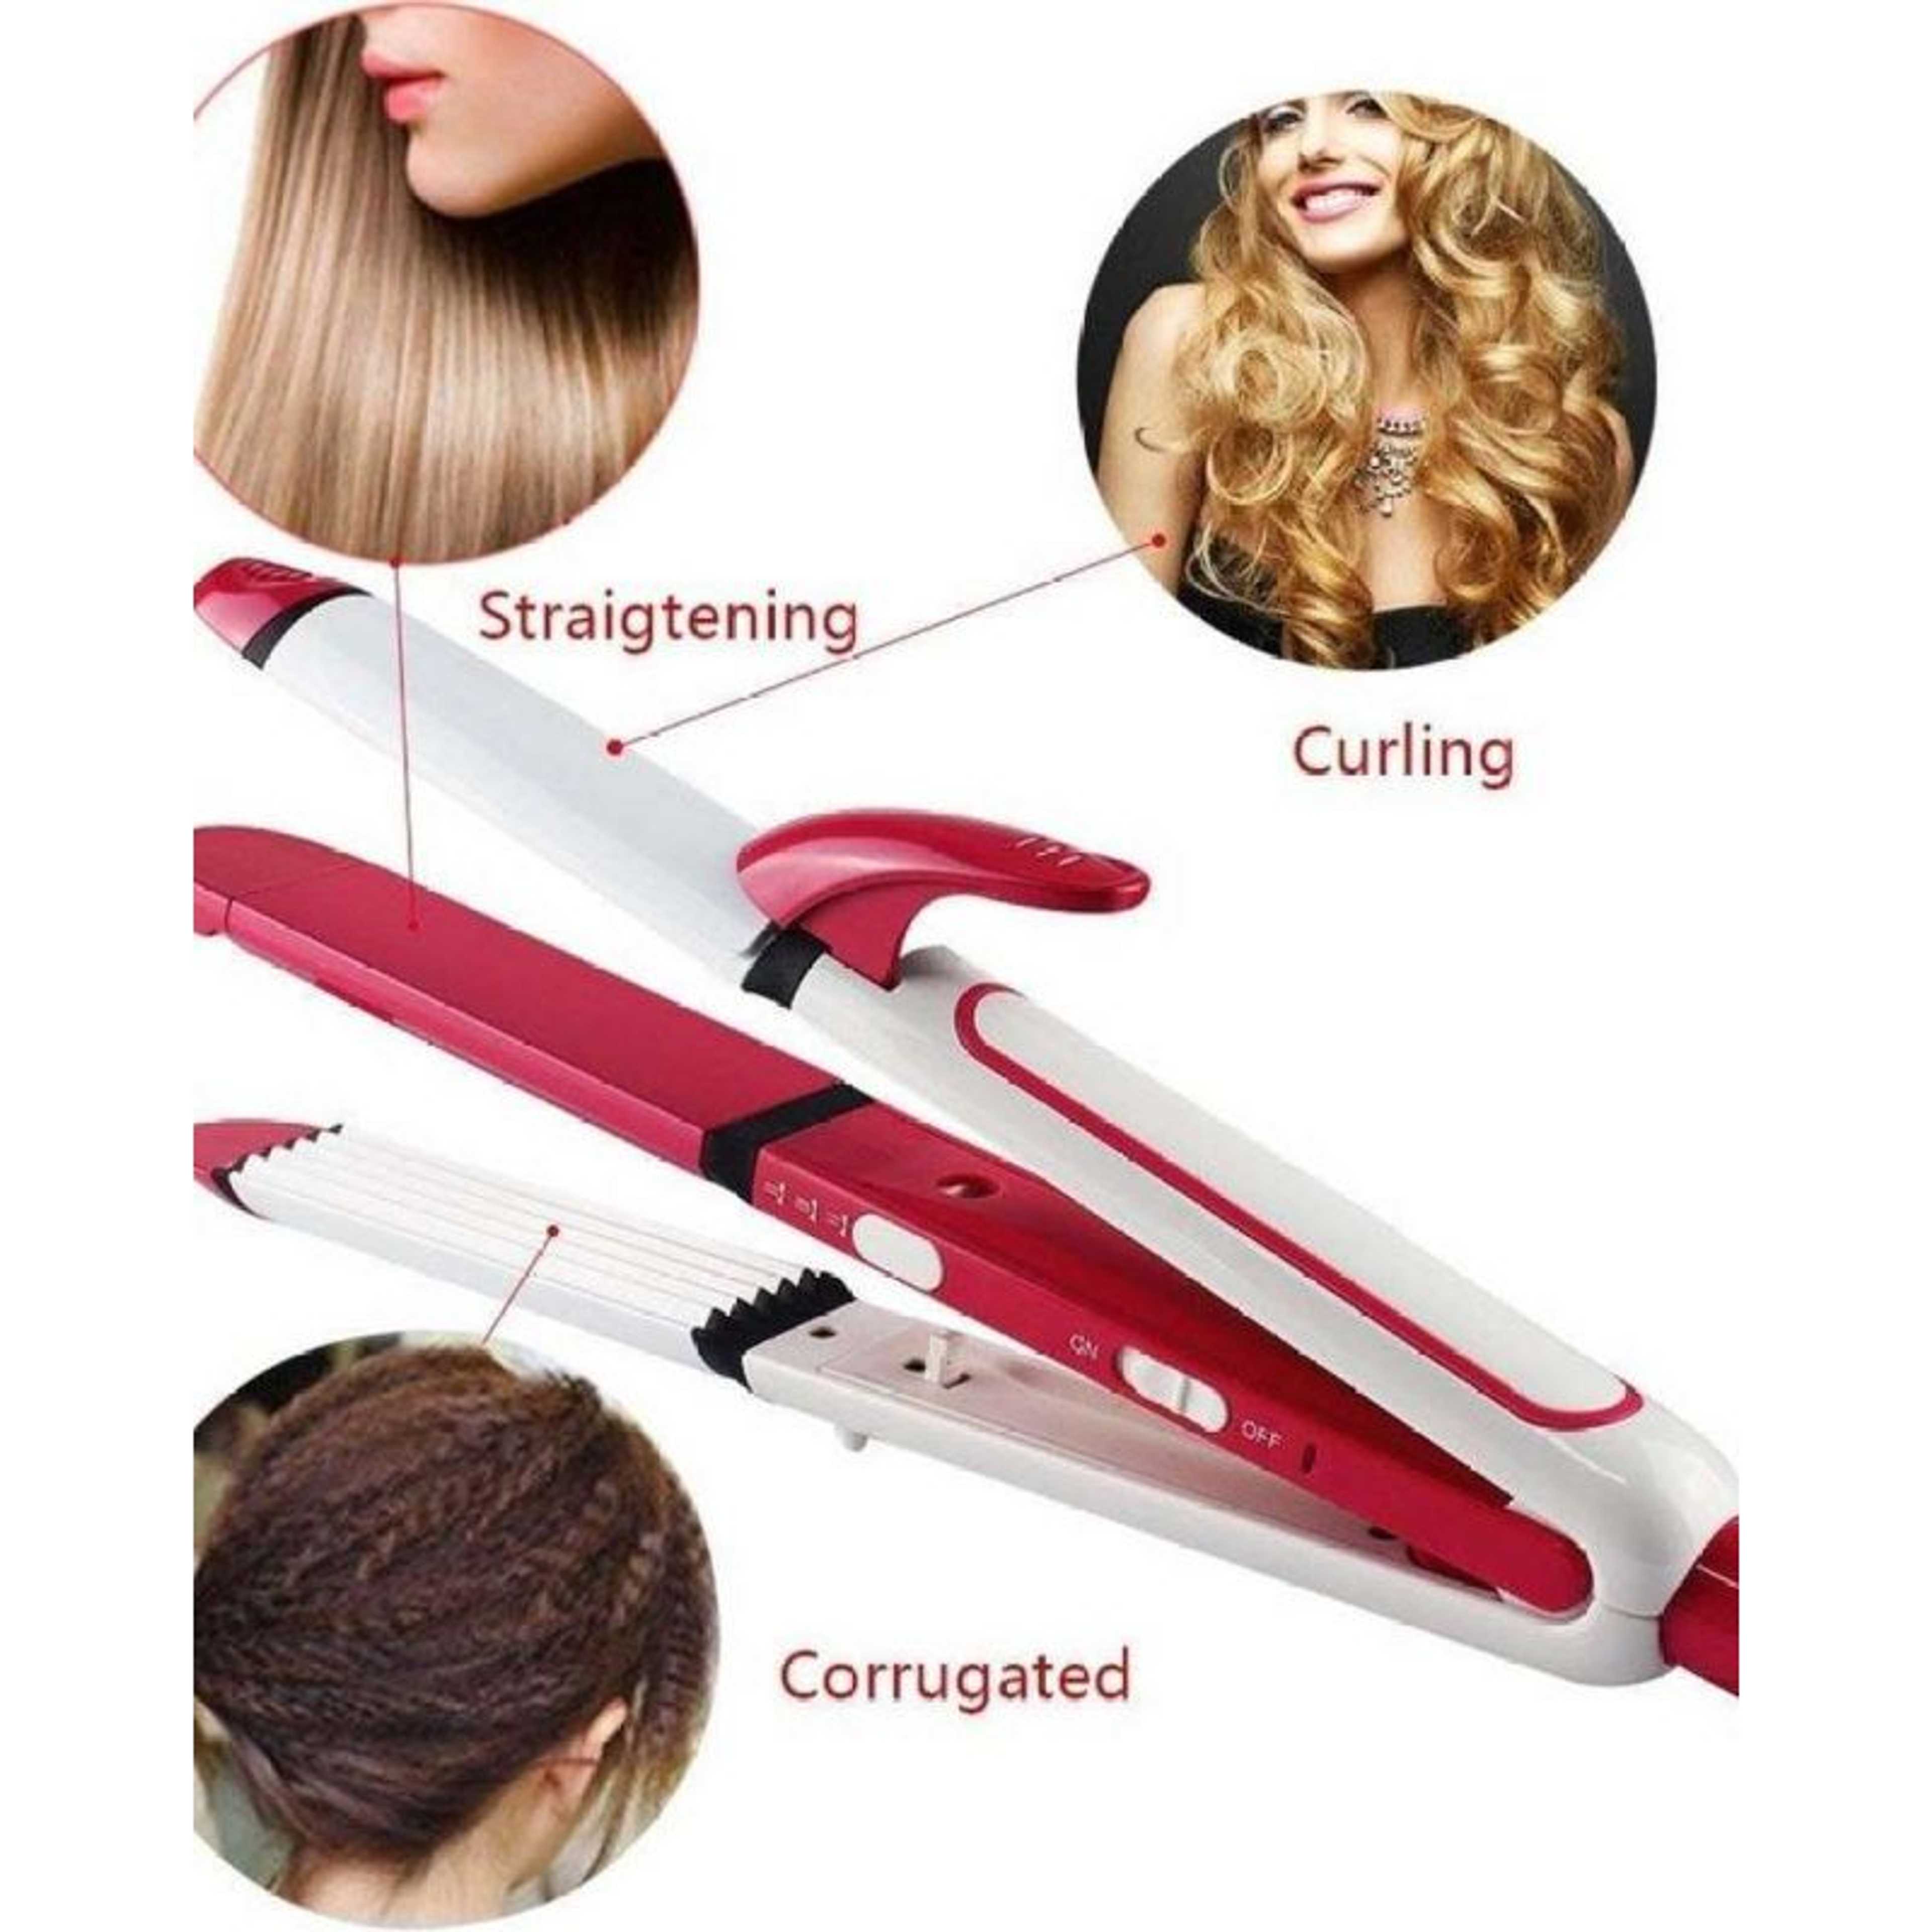 KM 1291 3 in 1 Hair Straightener Curler And Crimper Iron